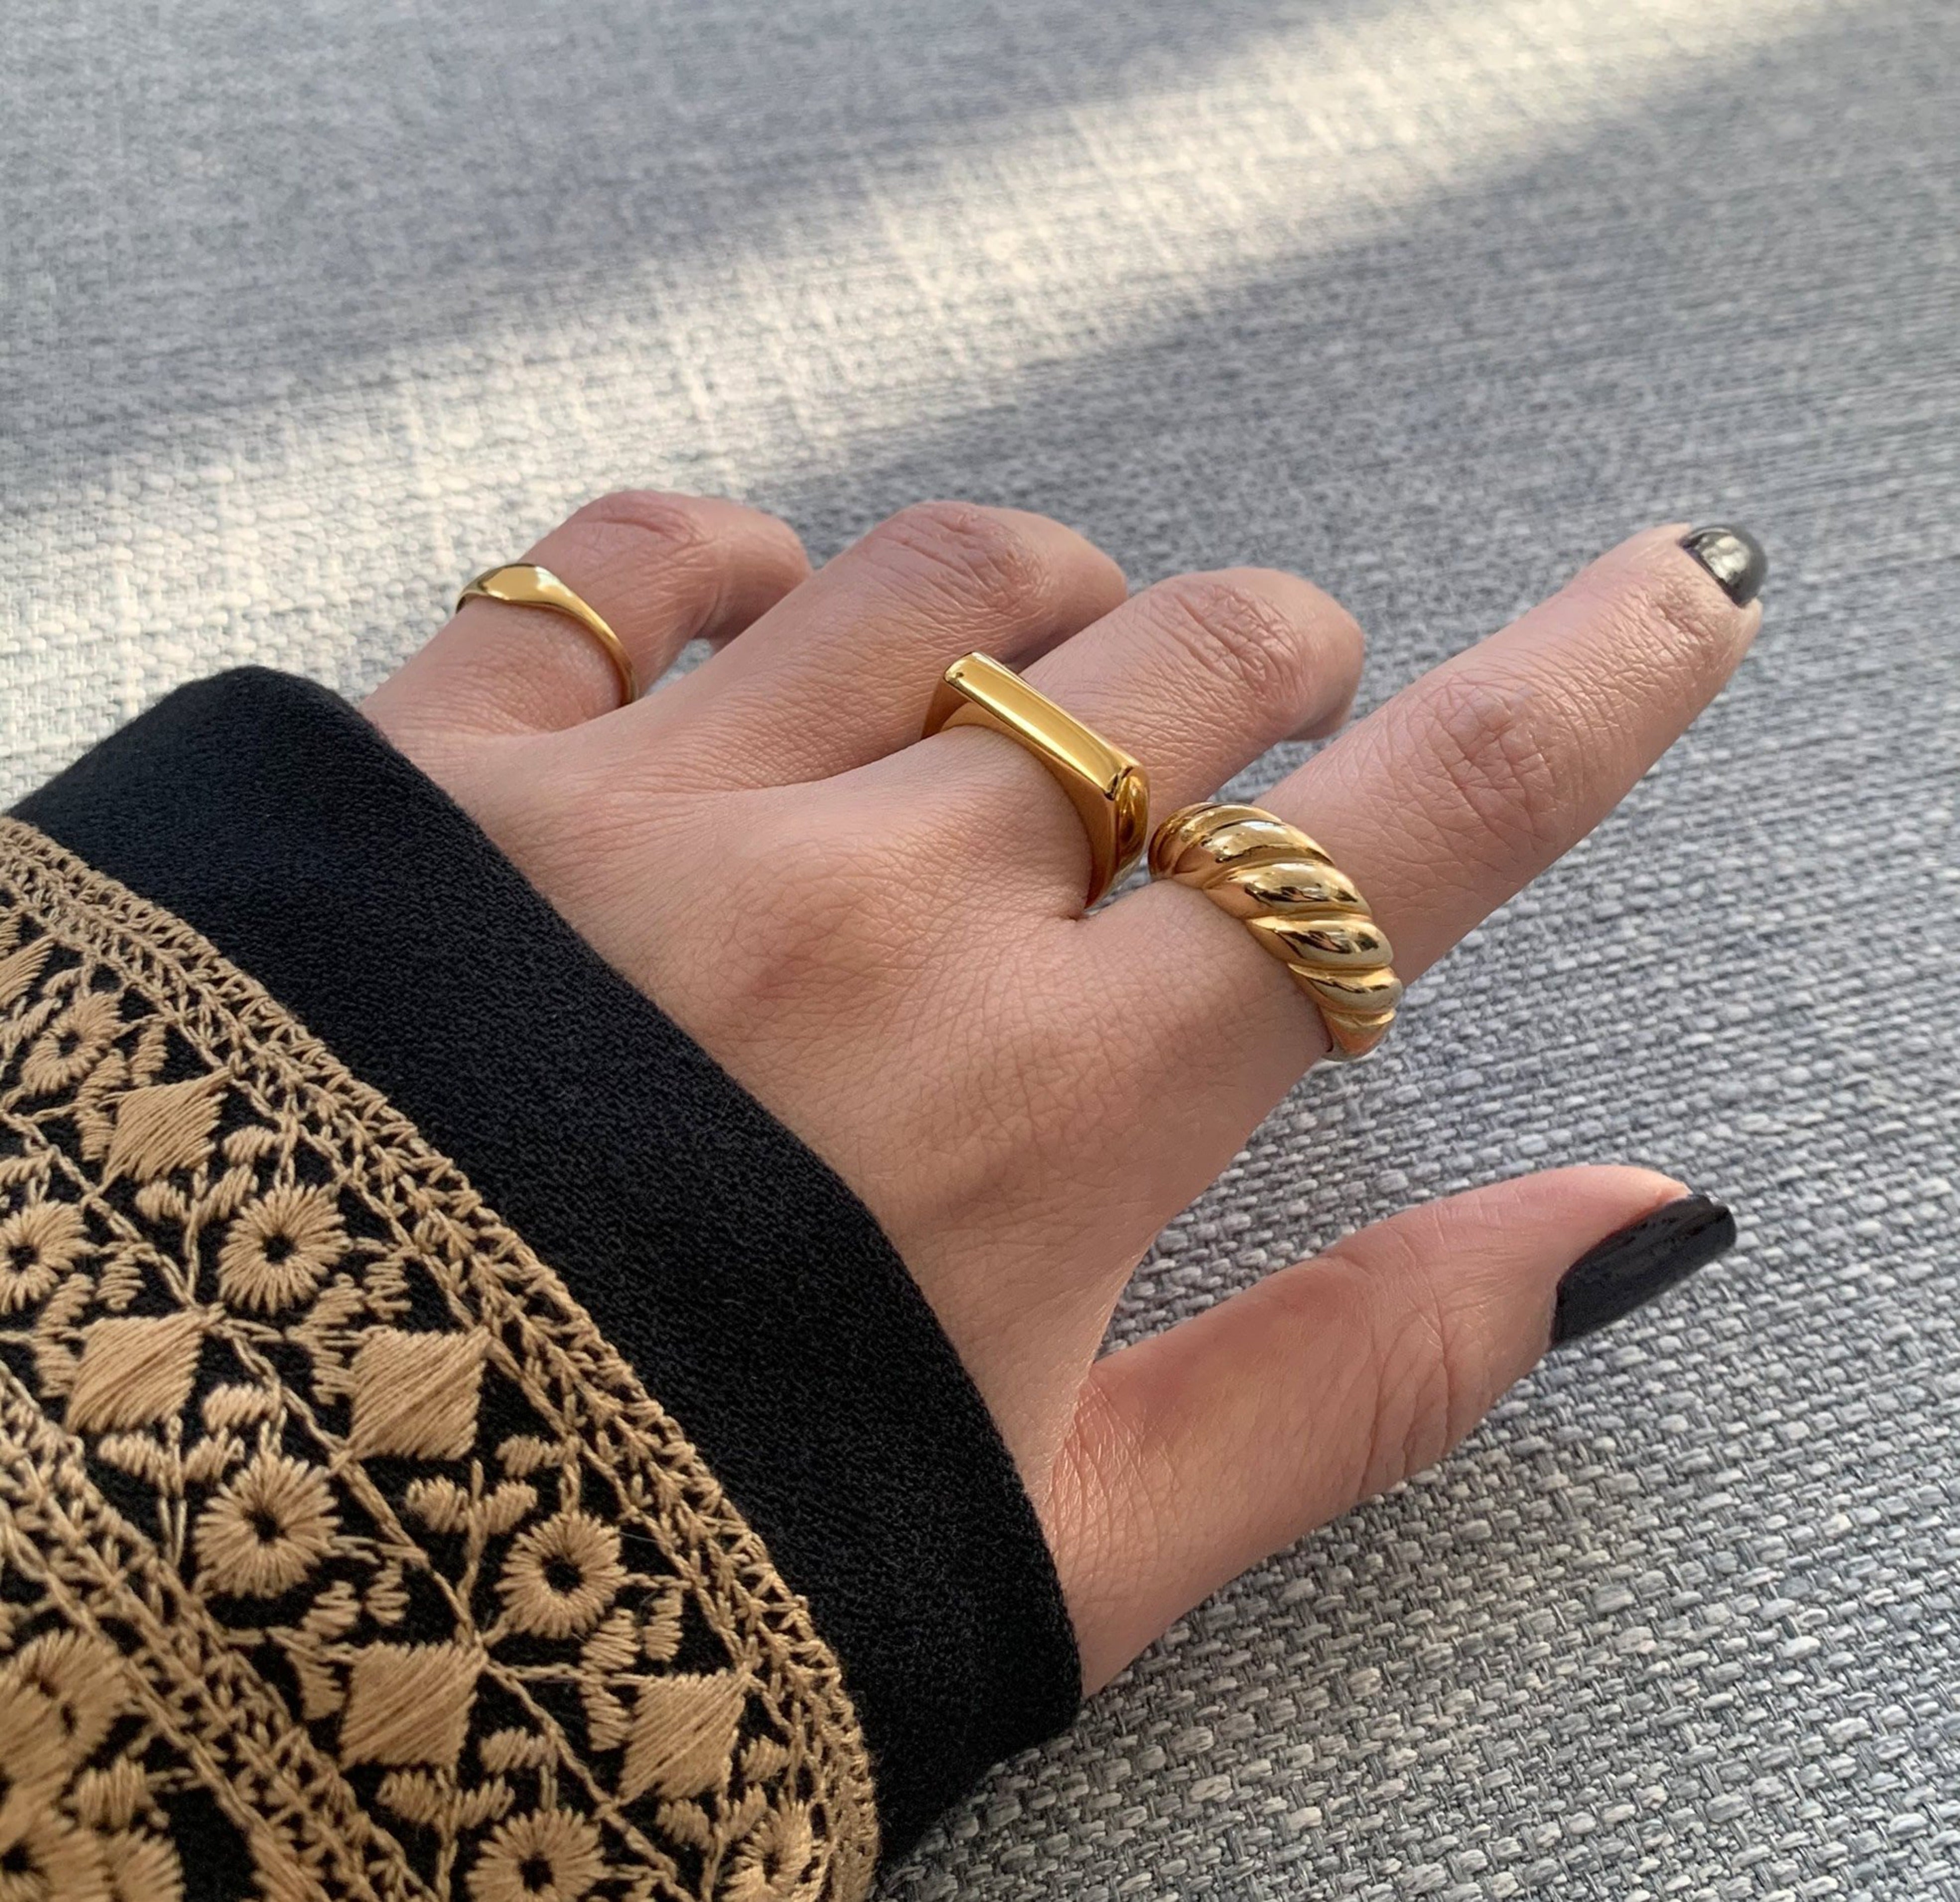 Gold classic croissant ring paired with Drew pinky signet ring. Waterproof rings